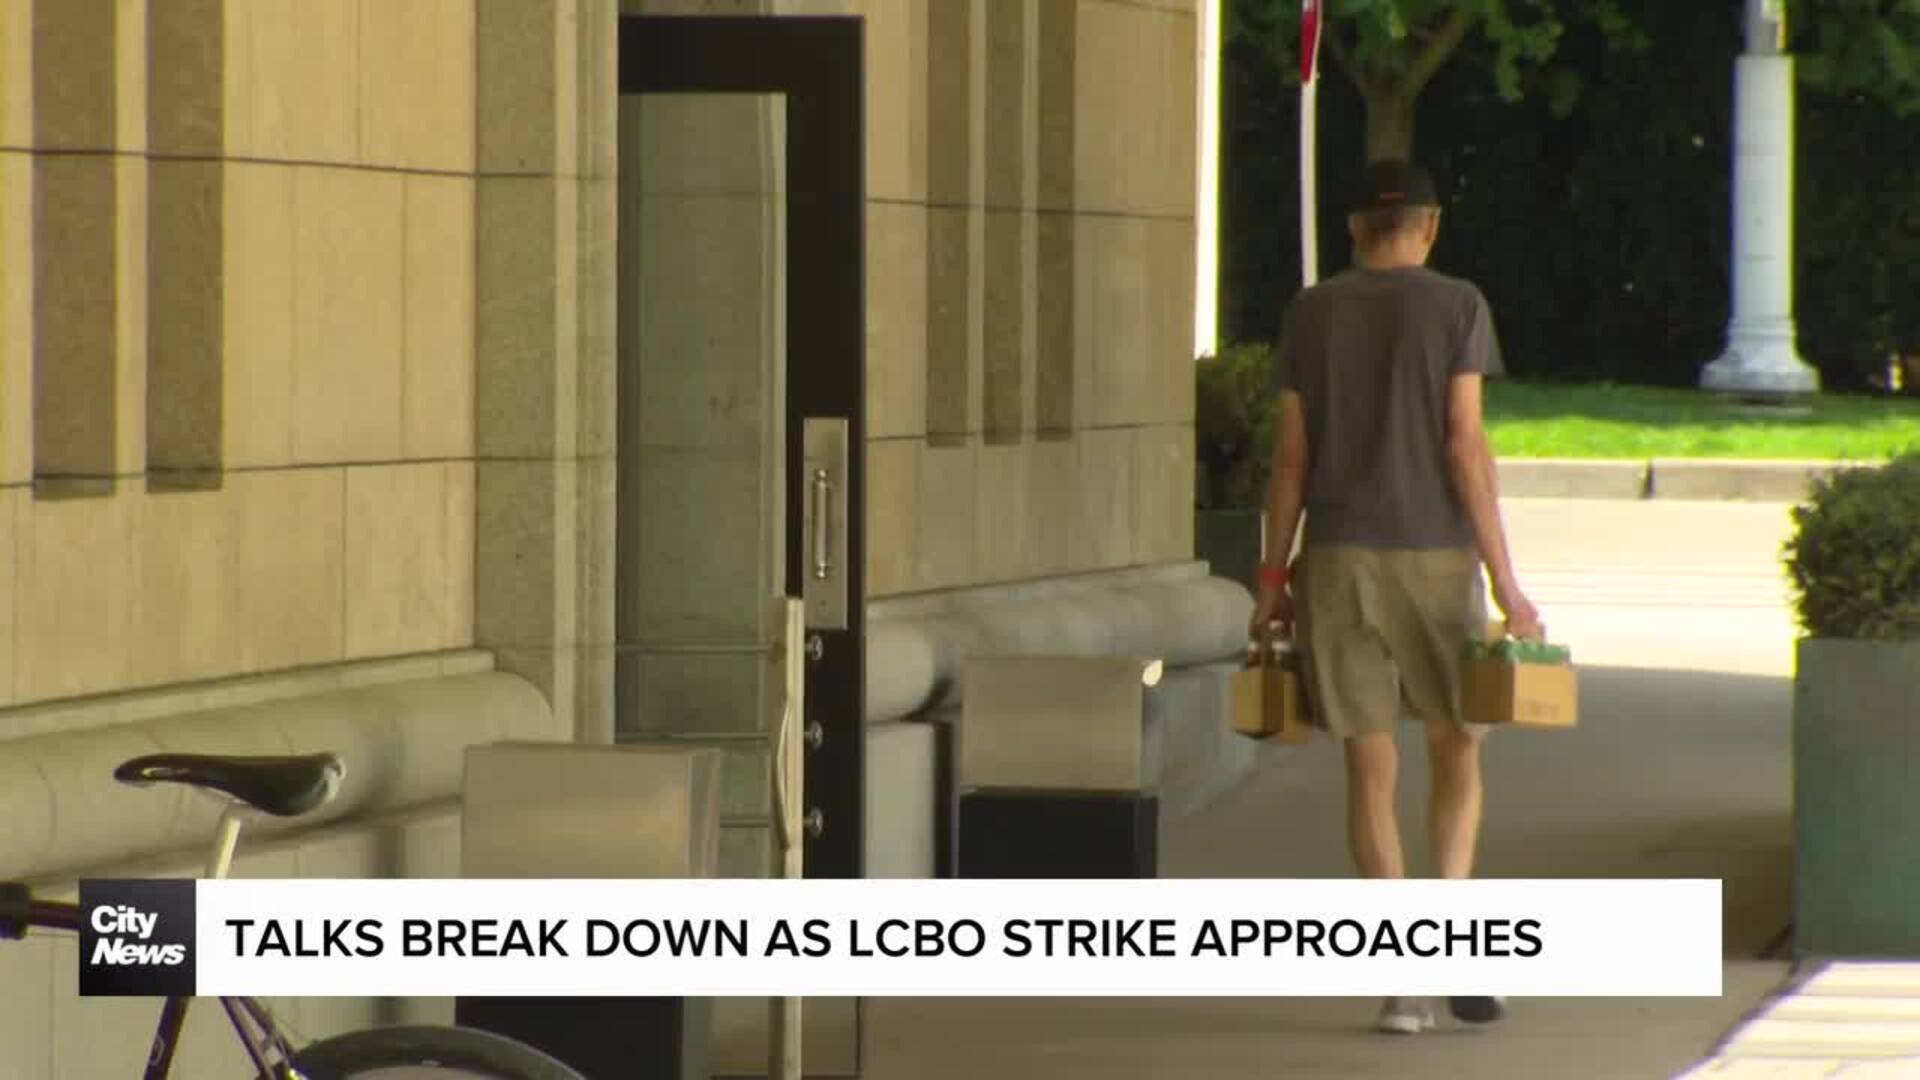 Union says talks with LCBO break down as strike at midnight approaches